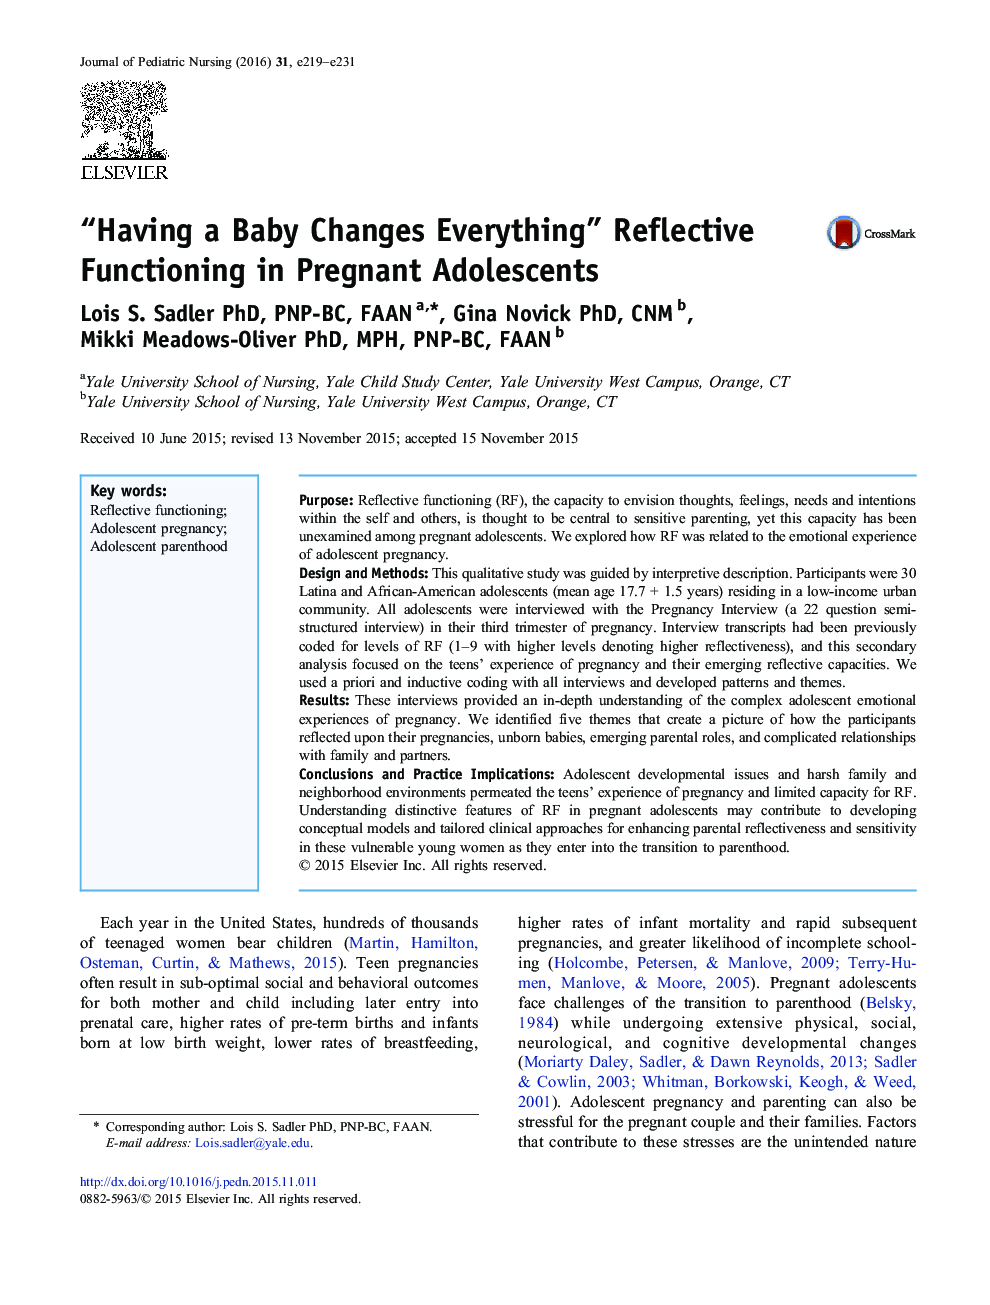 “Having a Baby Changes Everything” Reflective Functioning in Pregnant Adolescents